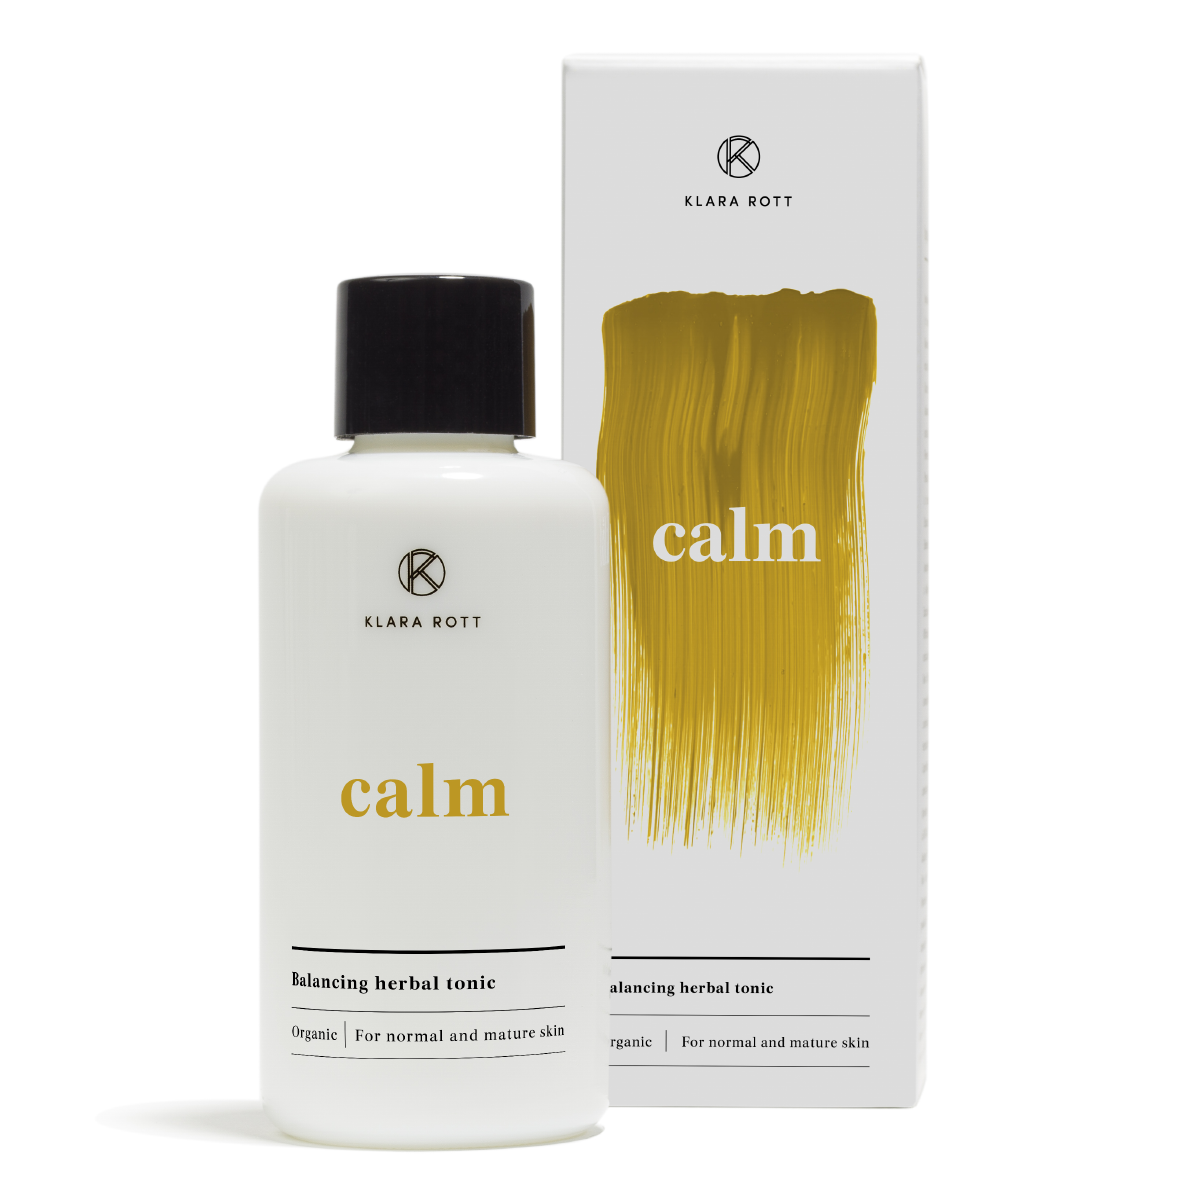 Calm - Herbal tonic with anti-wrinkle care 